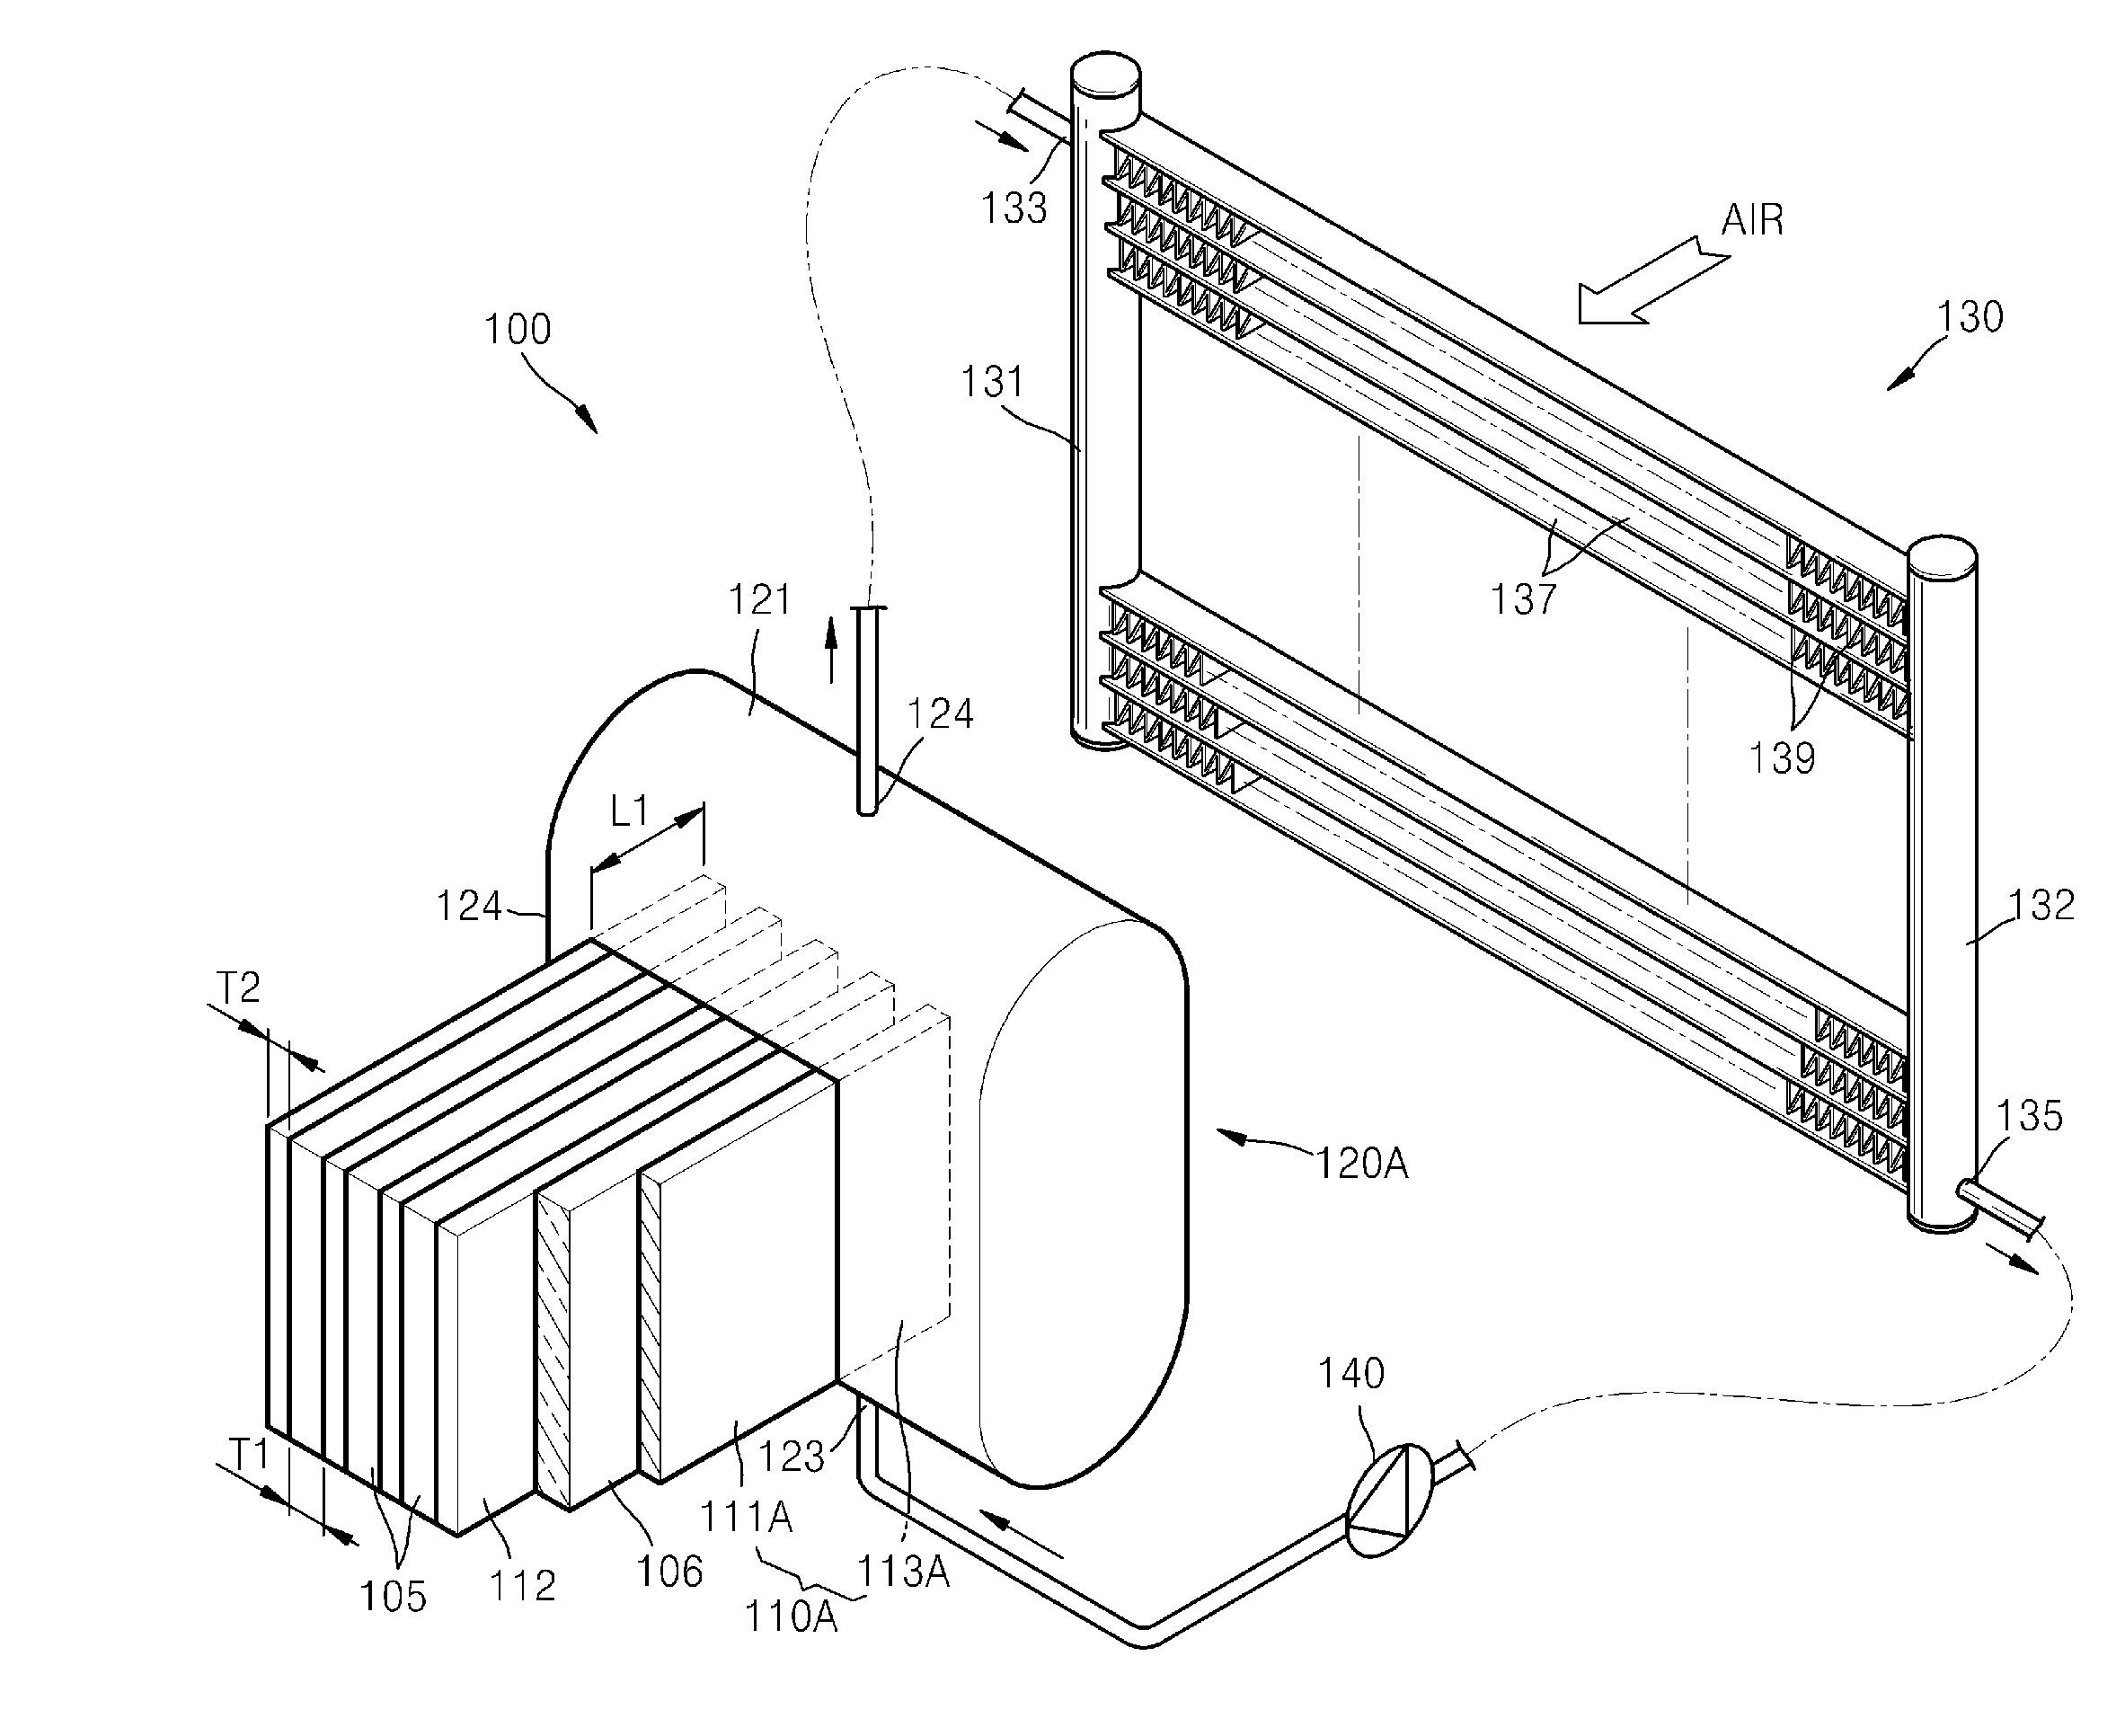 Cooling system and battery cooling system